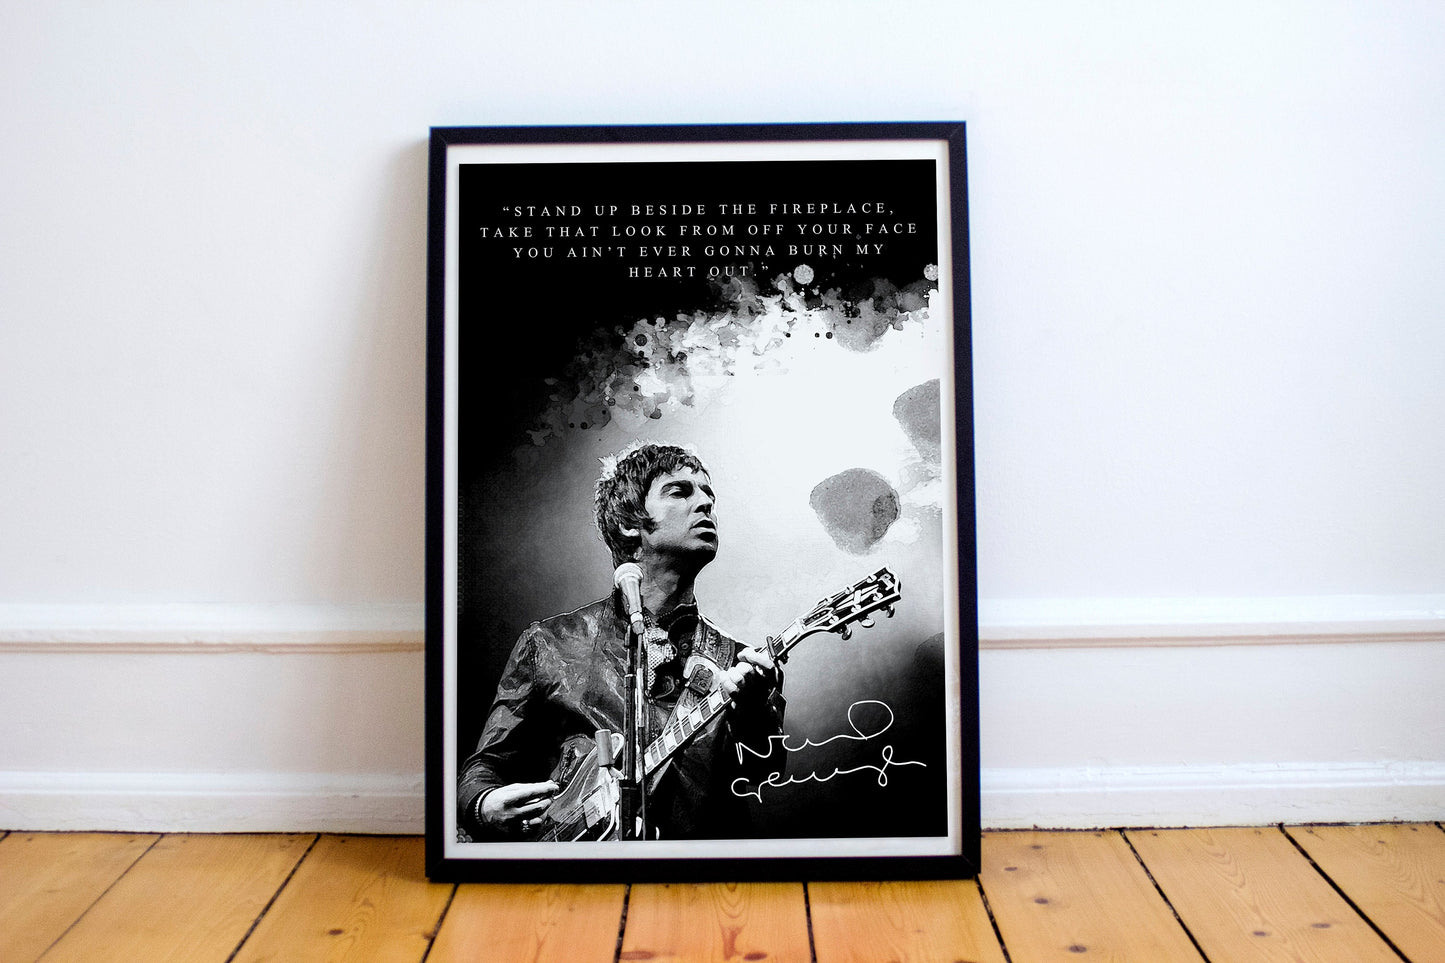 Noel Gallagher Inspired Print, Noel Gallagher Oasis Poster, Wall décor Music print, Best selling art, Noel Gallagher print, Oasis Art Print,